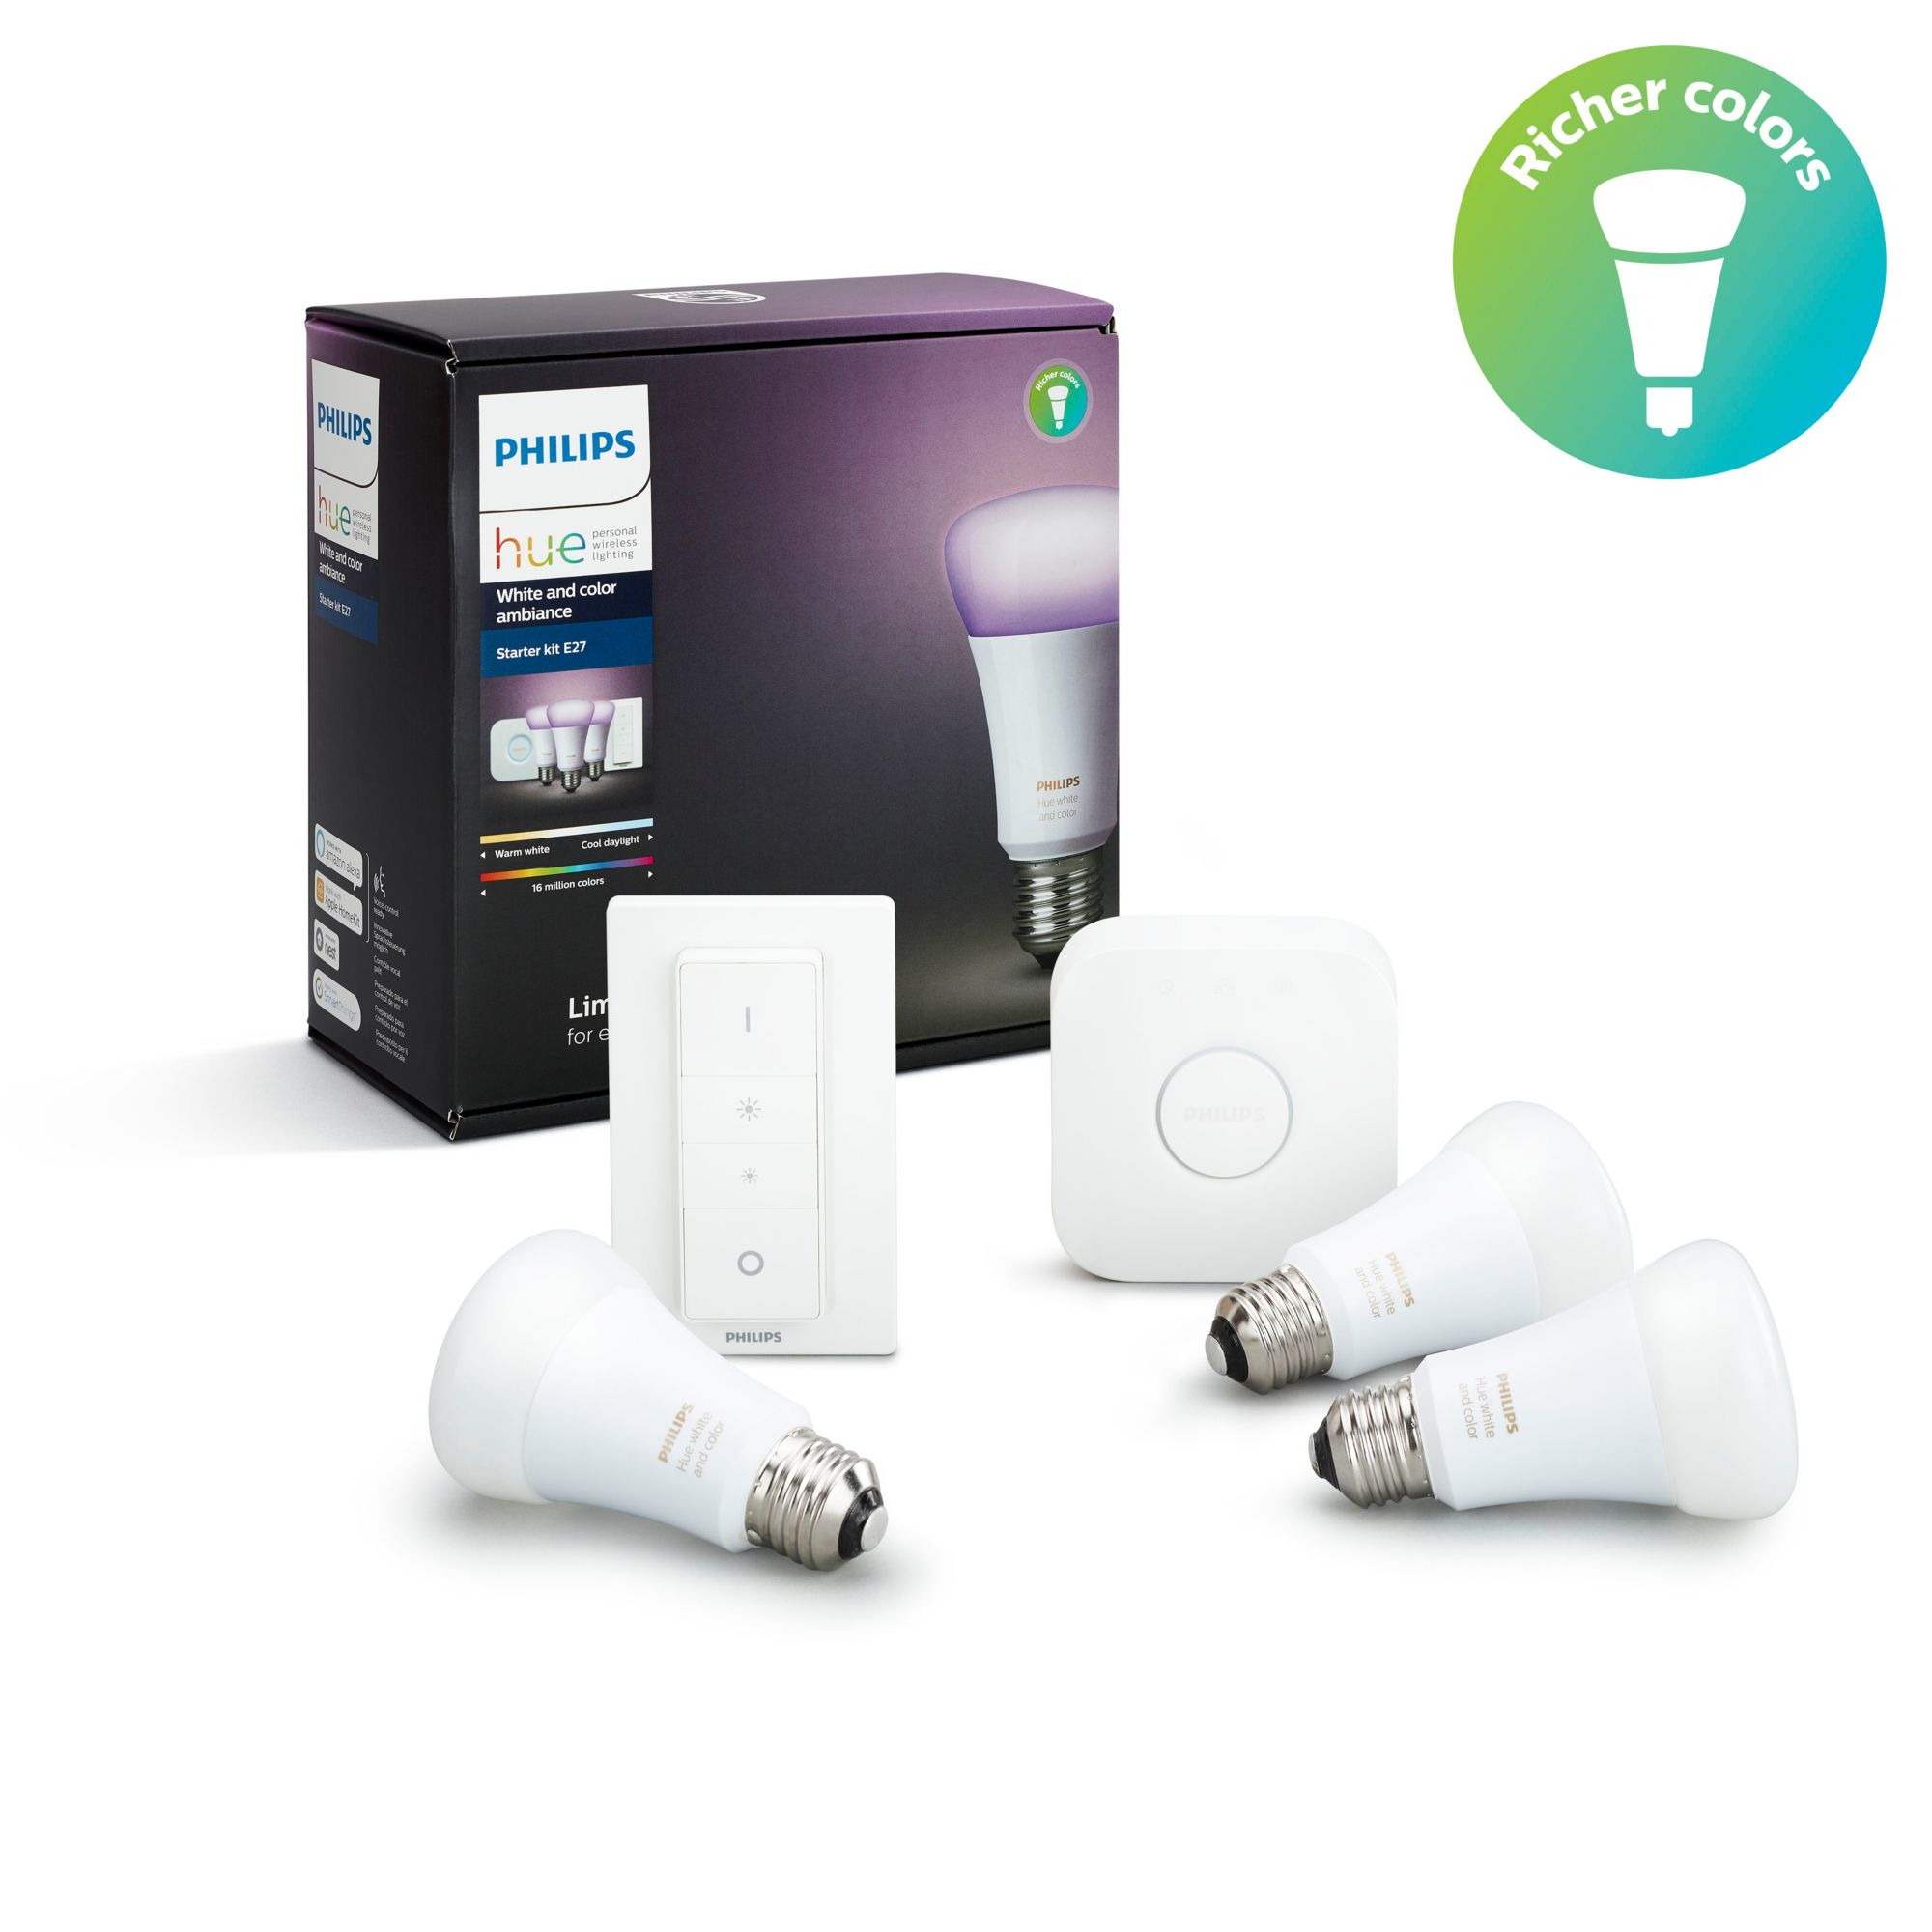 Philips Hue White and Color Starterkit E27